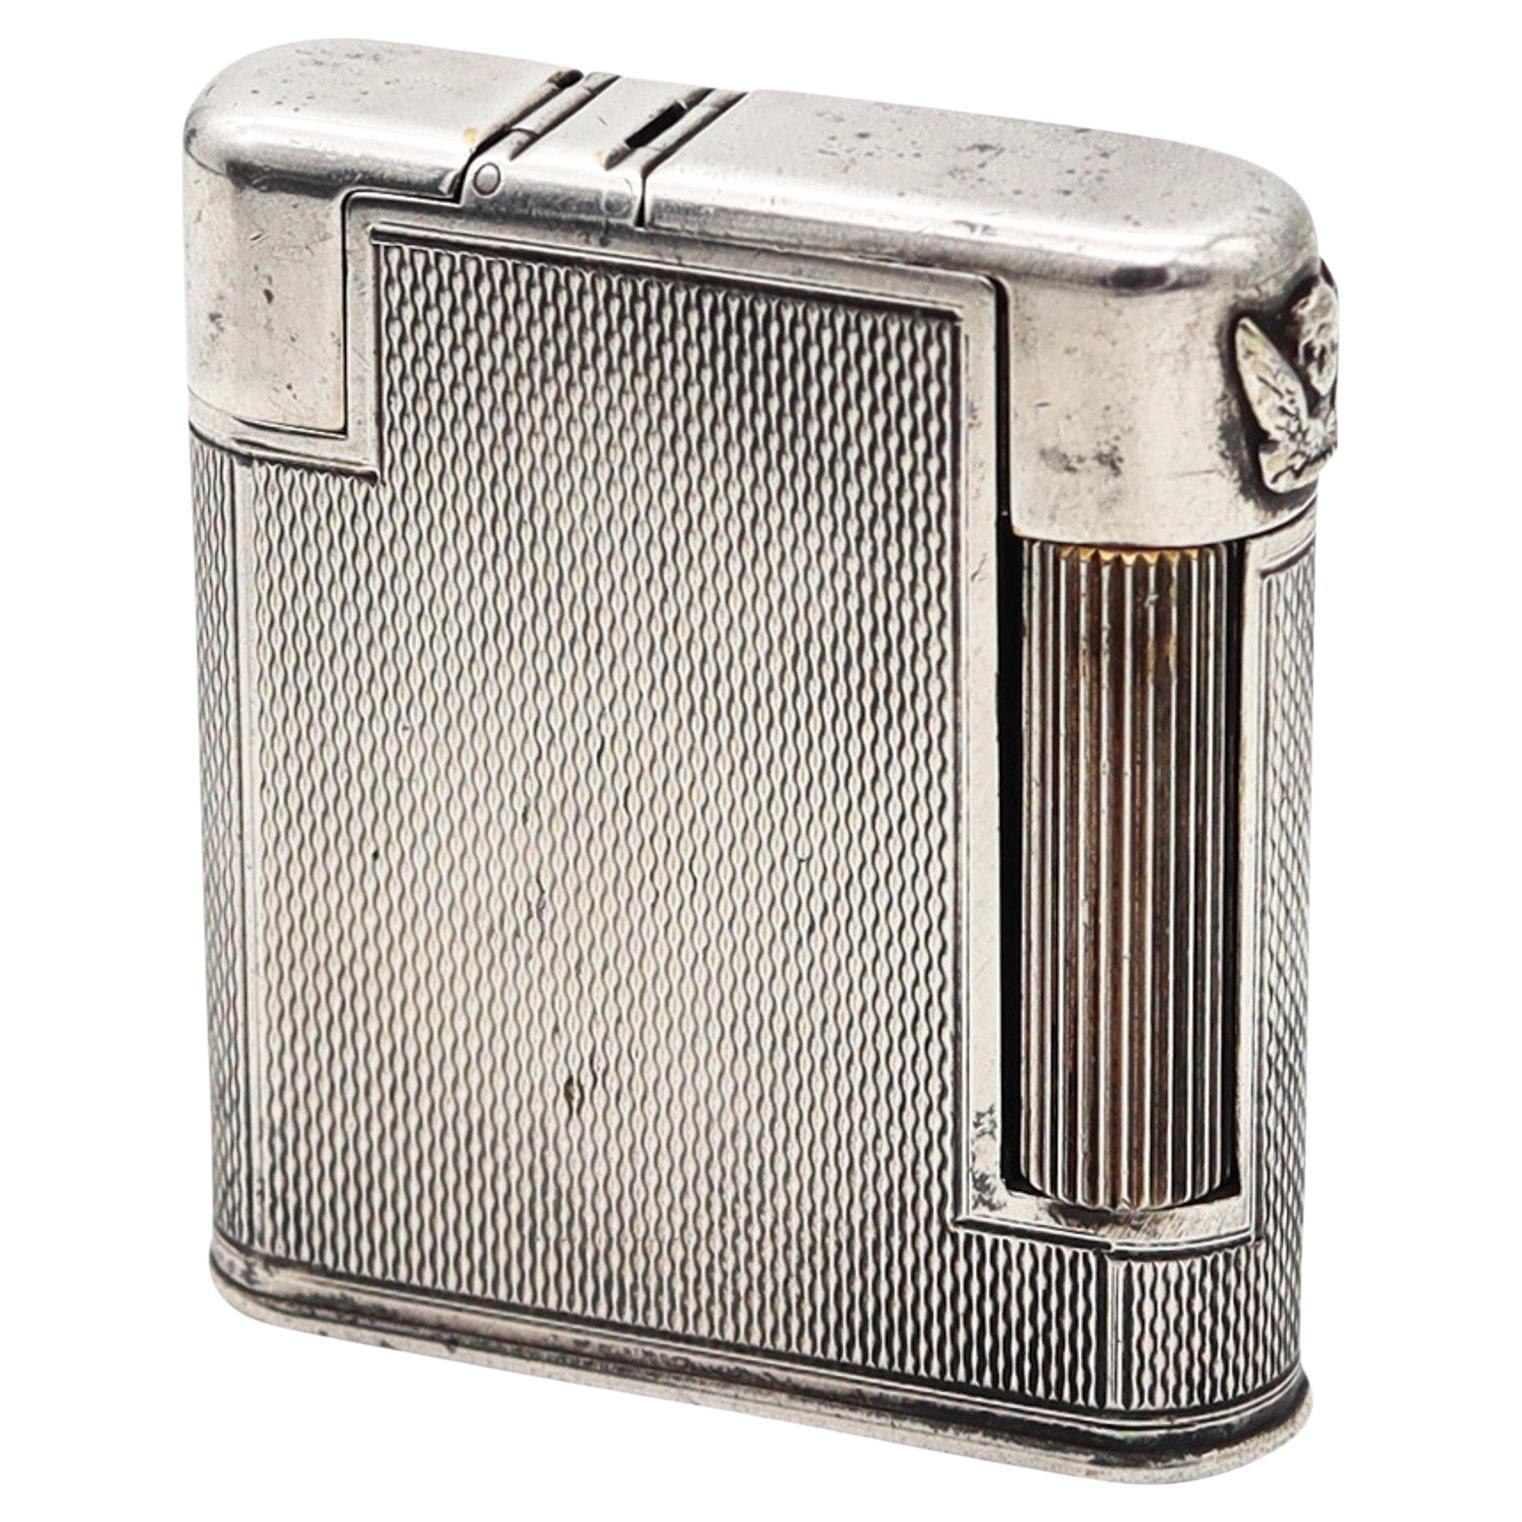 The Charles London 1947 Pocket Petrol Lighter Guilloche Plated Sterling Silver For Sale